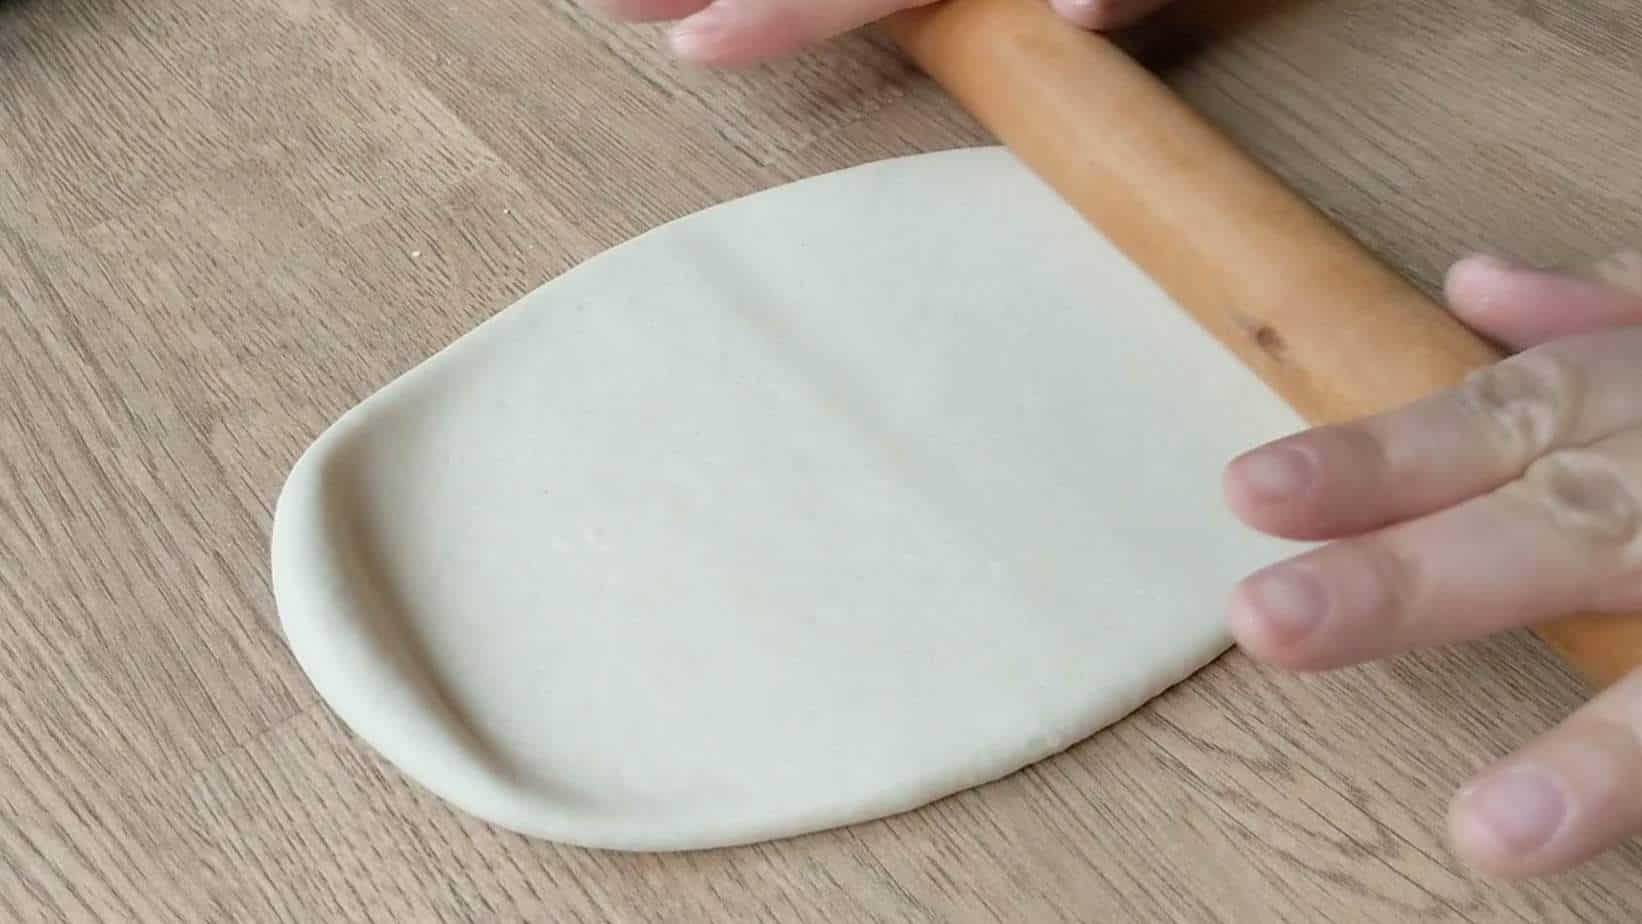 A piece of dough flattened by a rolling pin.